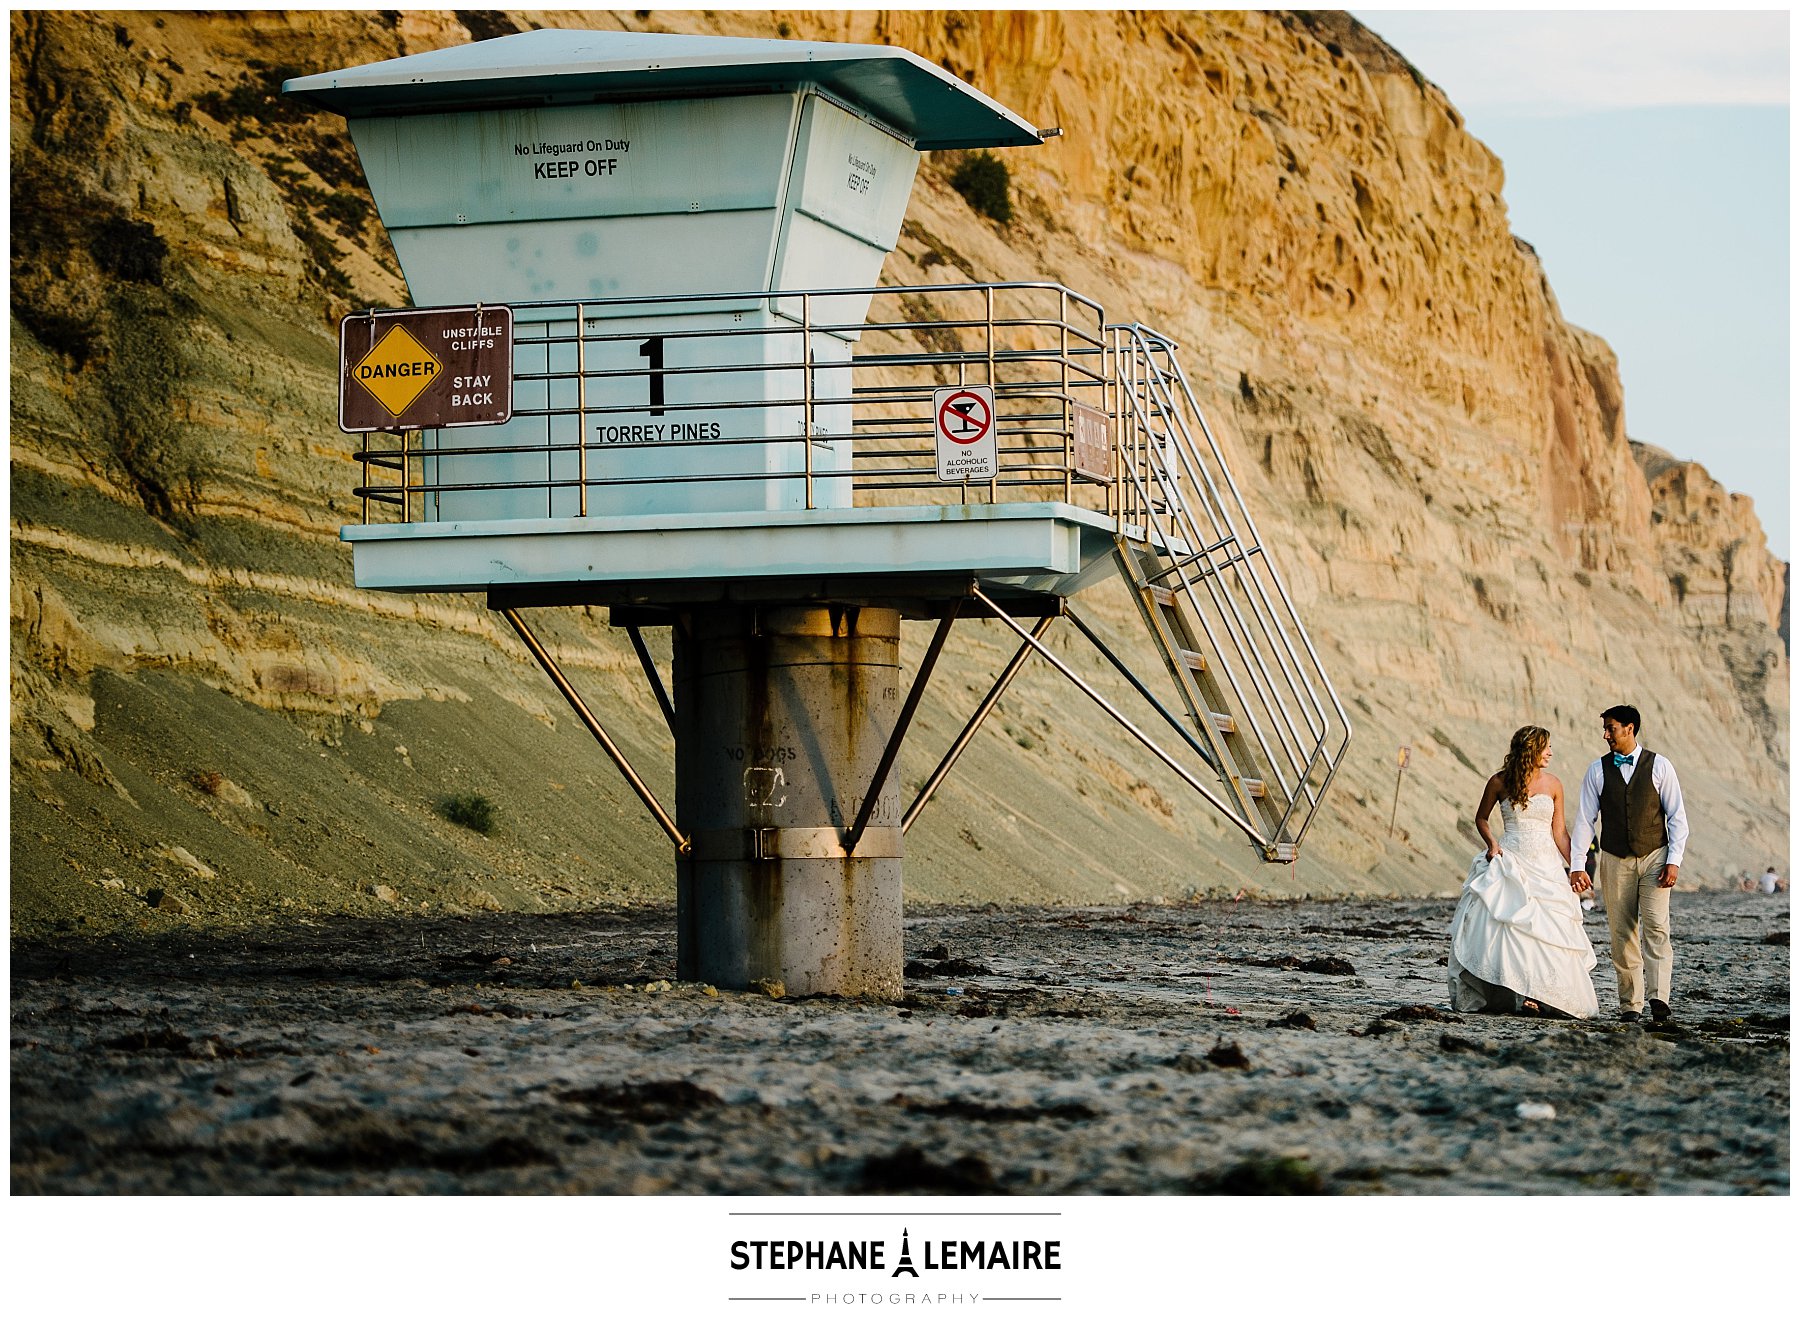 San Diego Wedding Session- Scenery shot of couple on the beach near lifeguard station at Torrey Pines State Natural Reserve